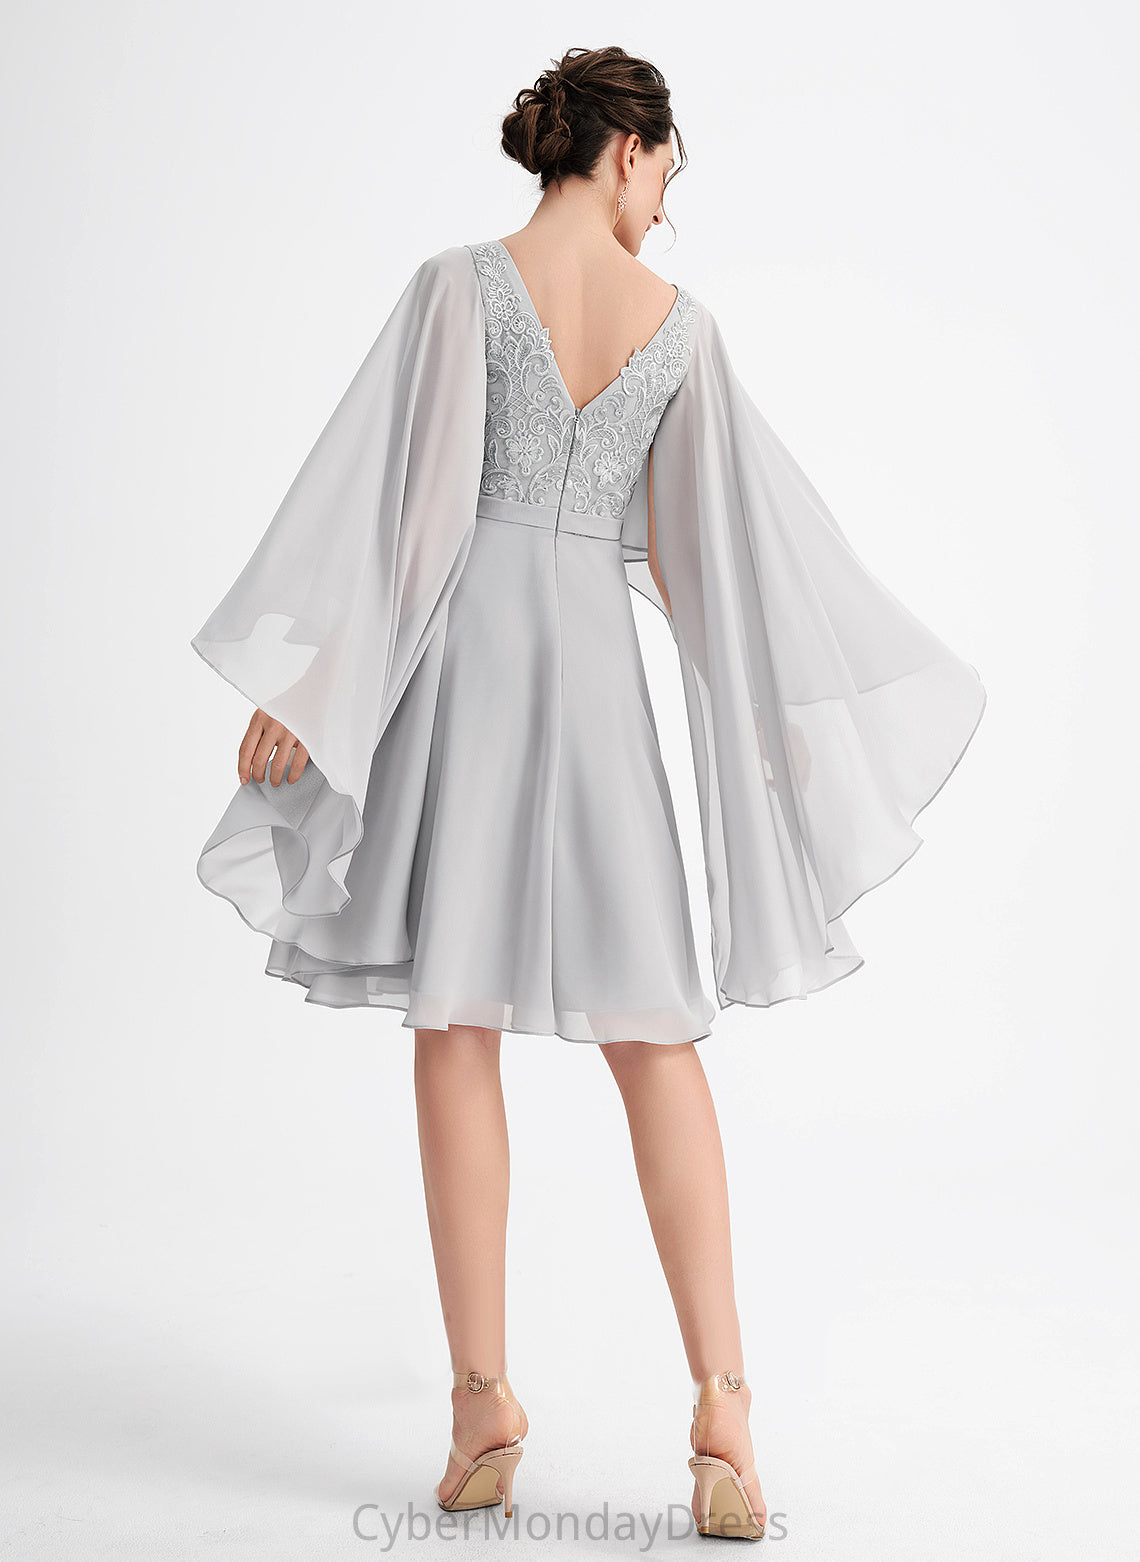 Dress A-Line Giovanna Knee-Length Cocktail Dresses Cocktail V-neck With Chiffon Lace